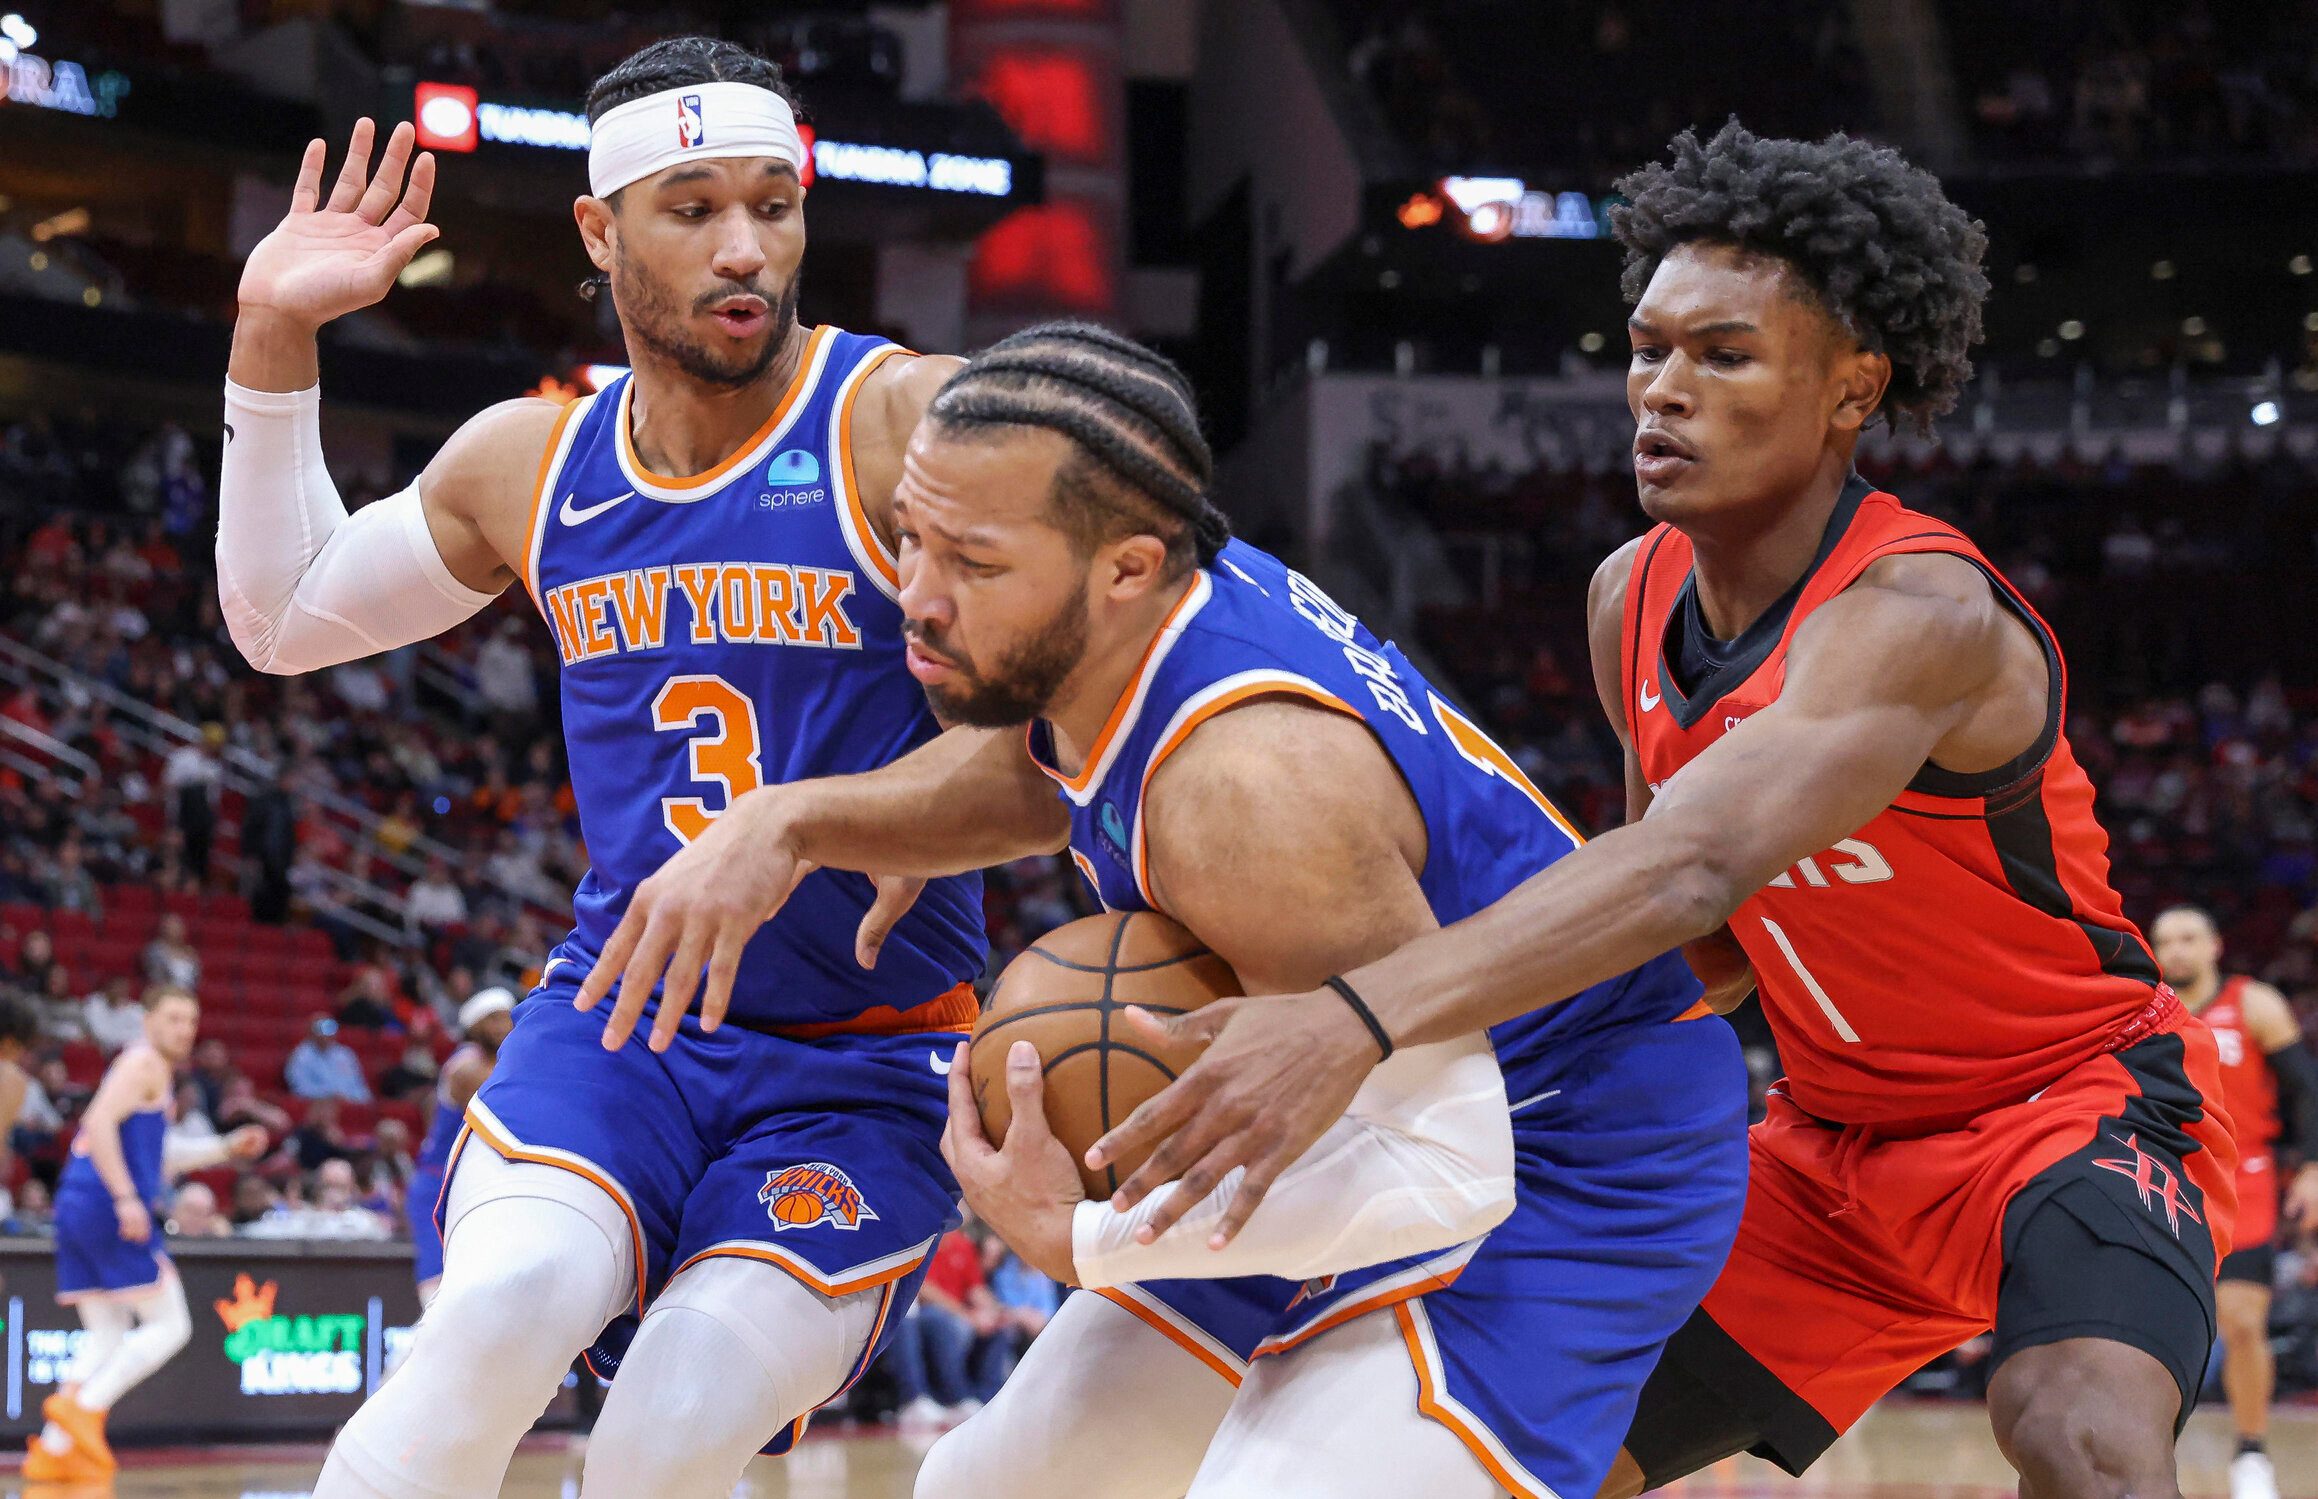 Knicks filing protest over last-second foul call in loss to Rockets – report